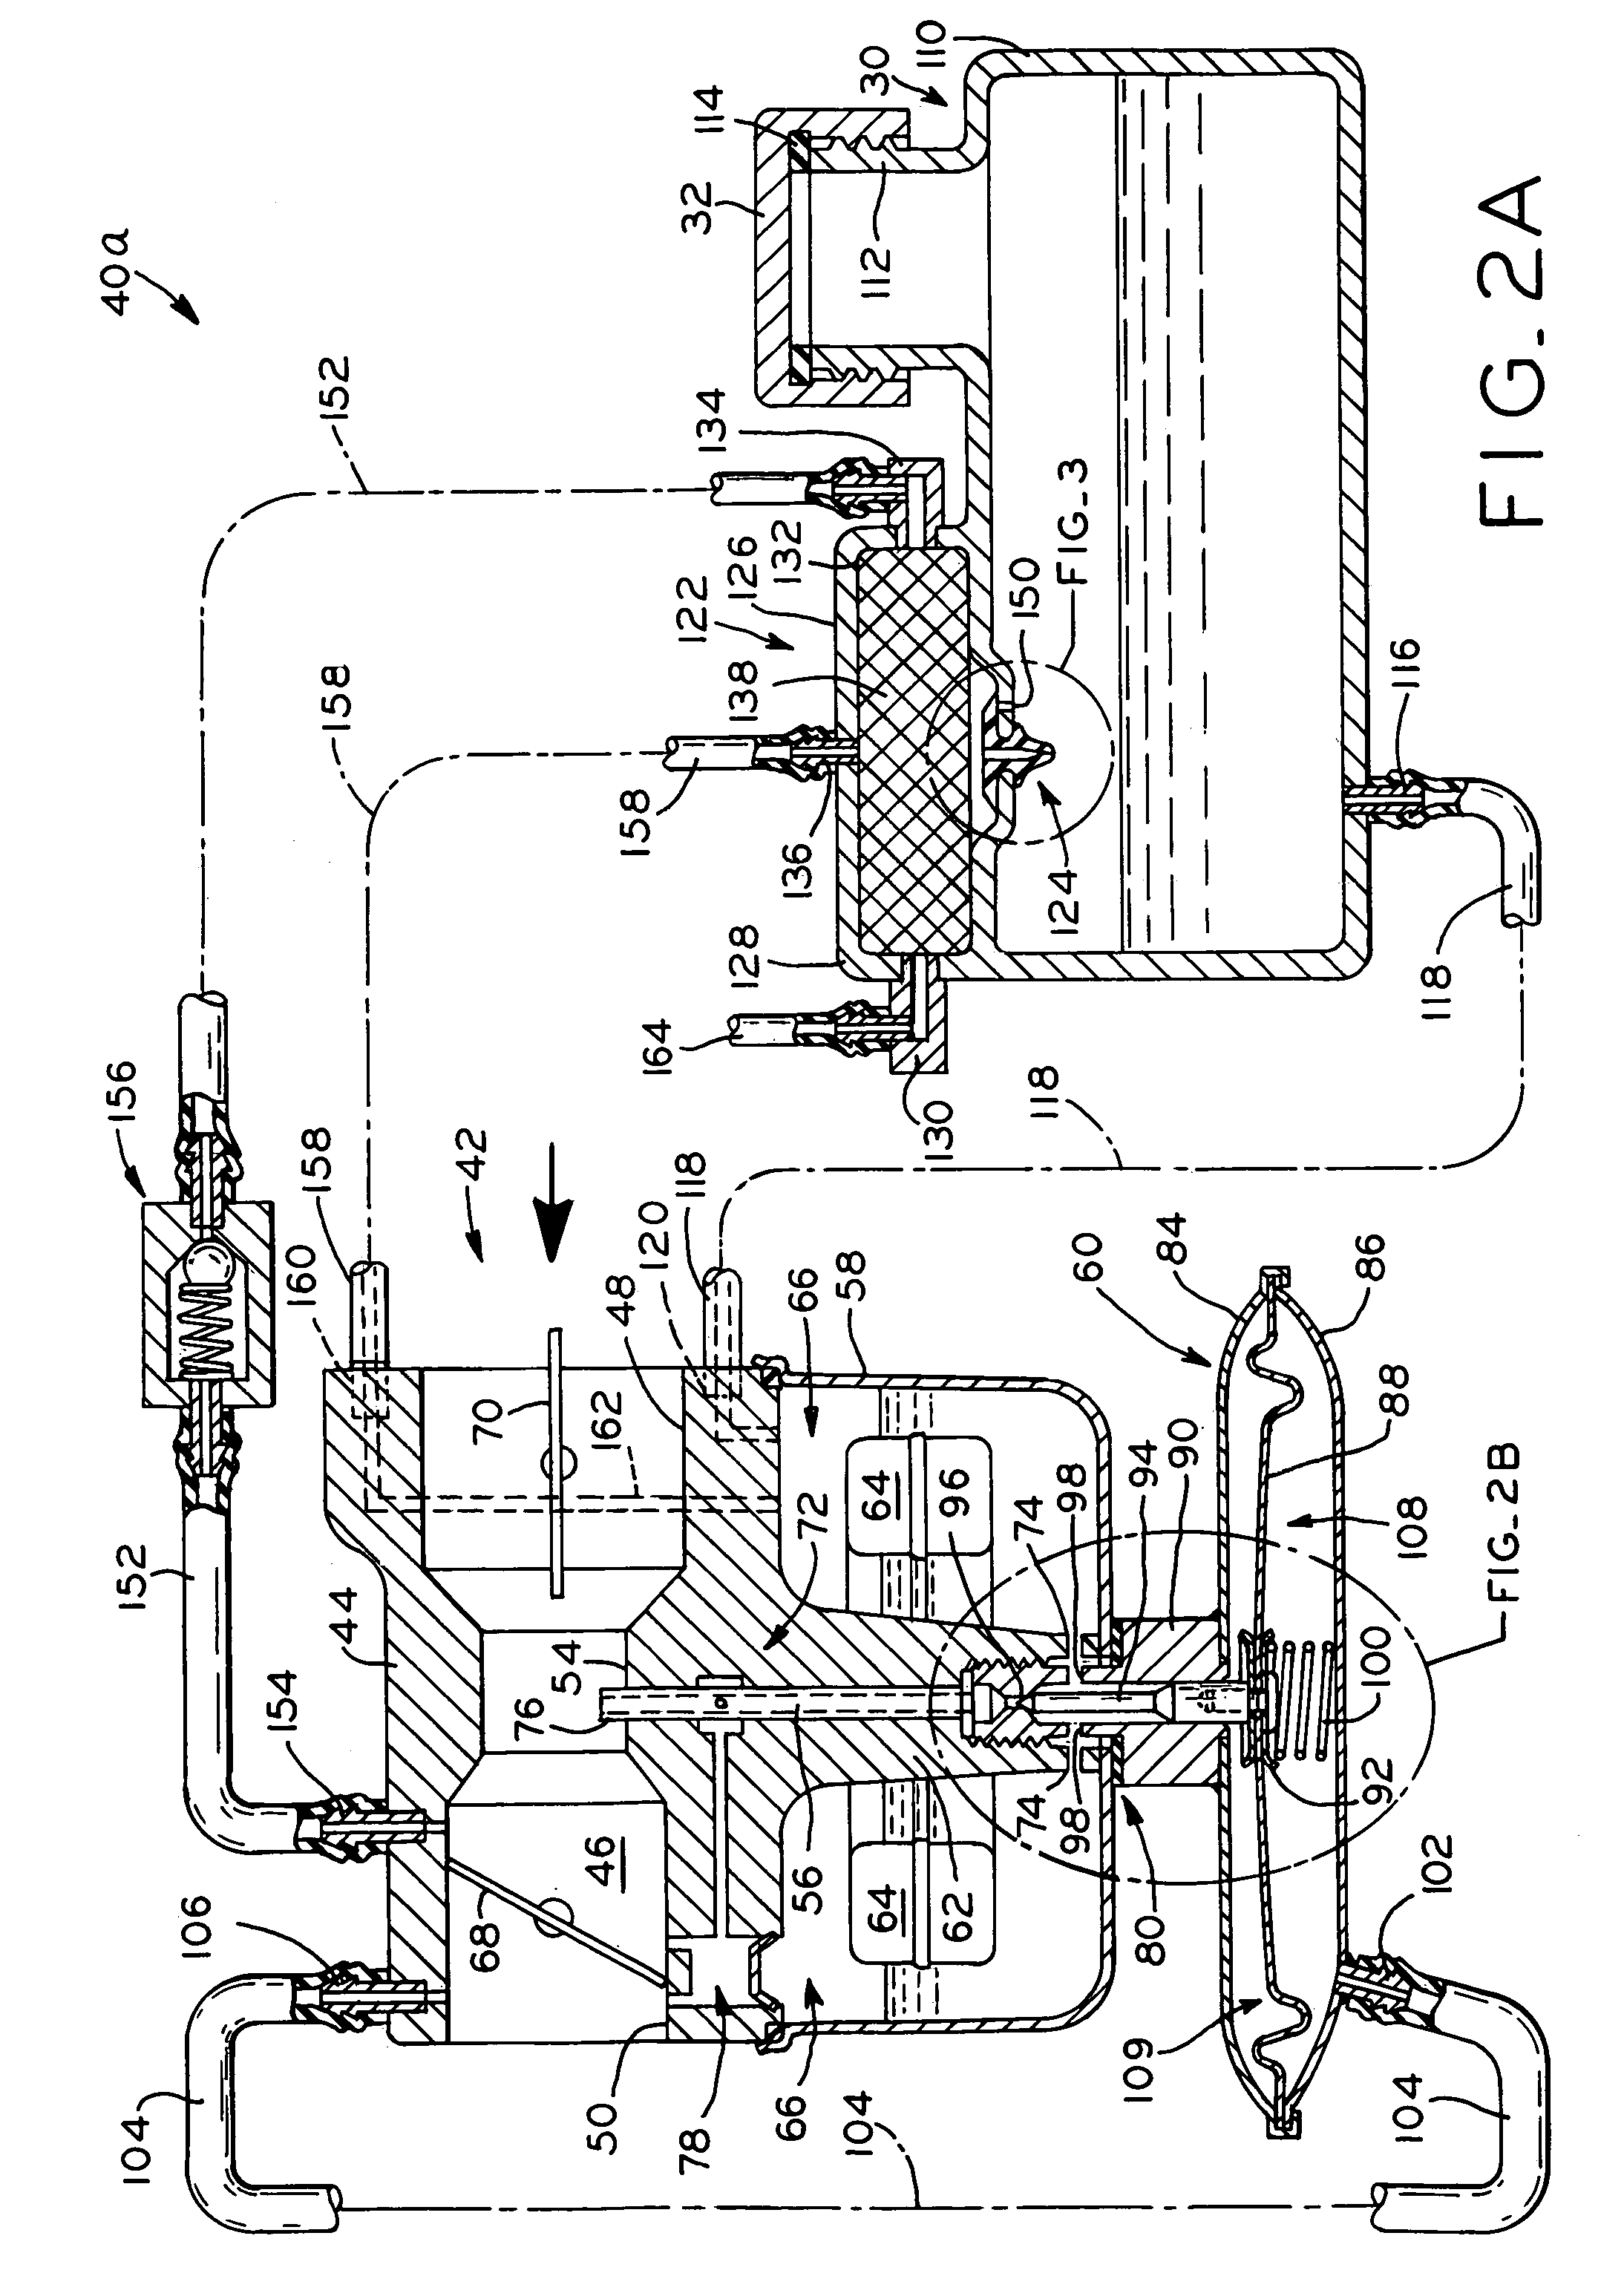 Evaporative emissions control system for small internal combustion engines